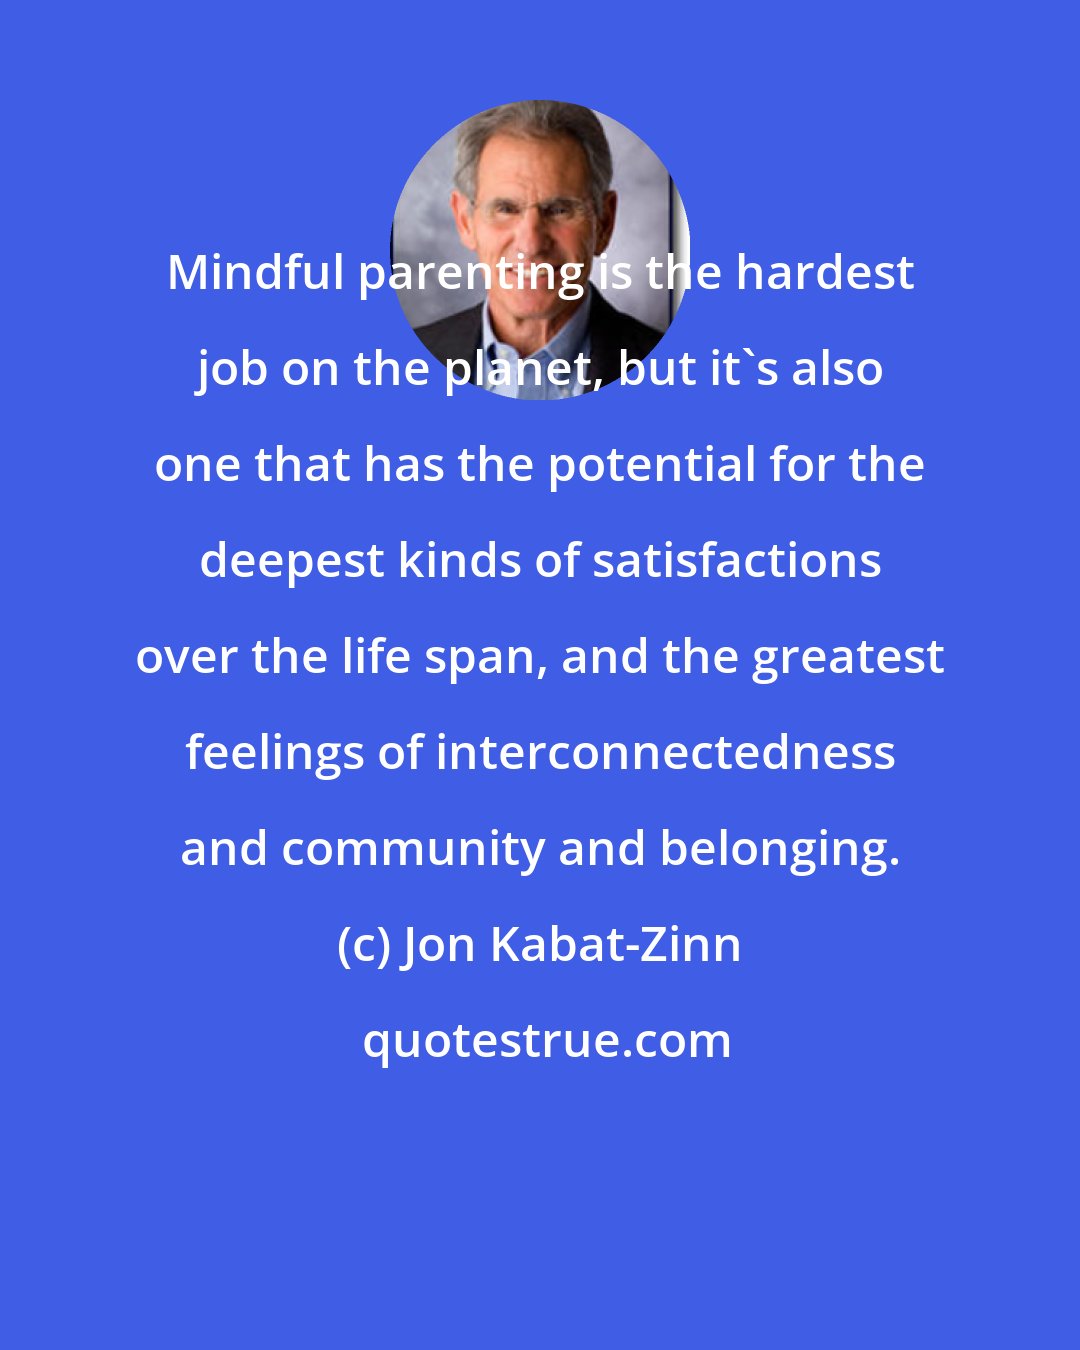 Jon Kabat-Zinn: Mindful parenting is the hardest job on the planet, but it's also one that has the potential for the deepest kinds of satisfactions over the life span, and the greatest feelings of interconnectedness and community and belonging.